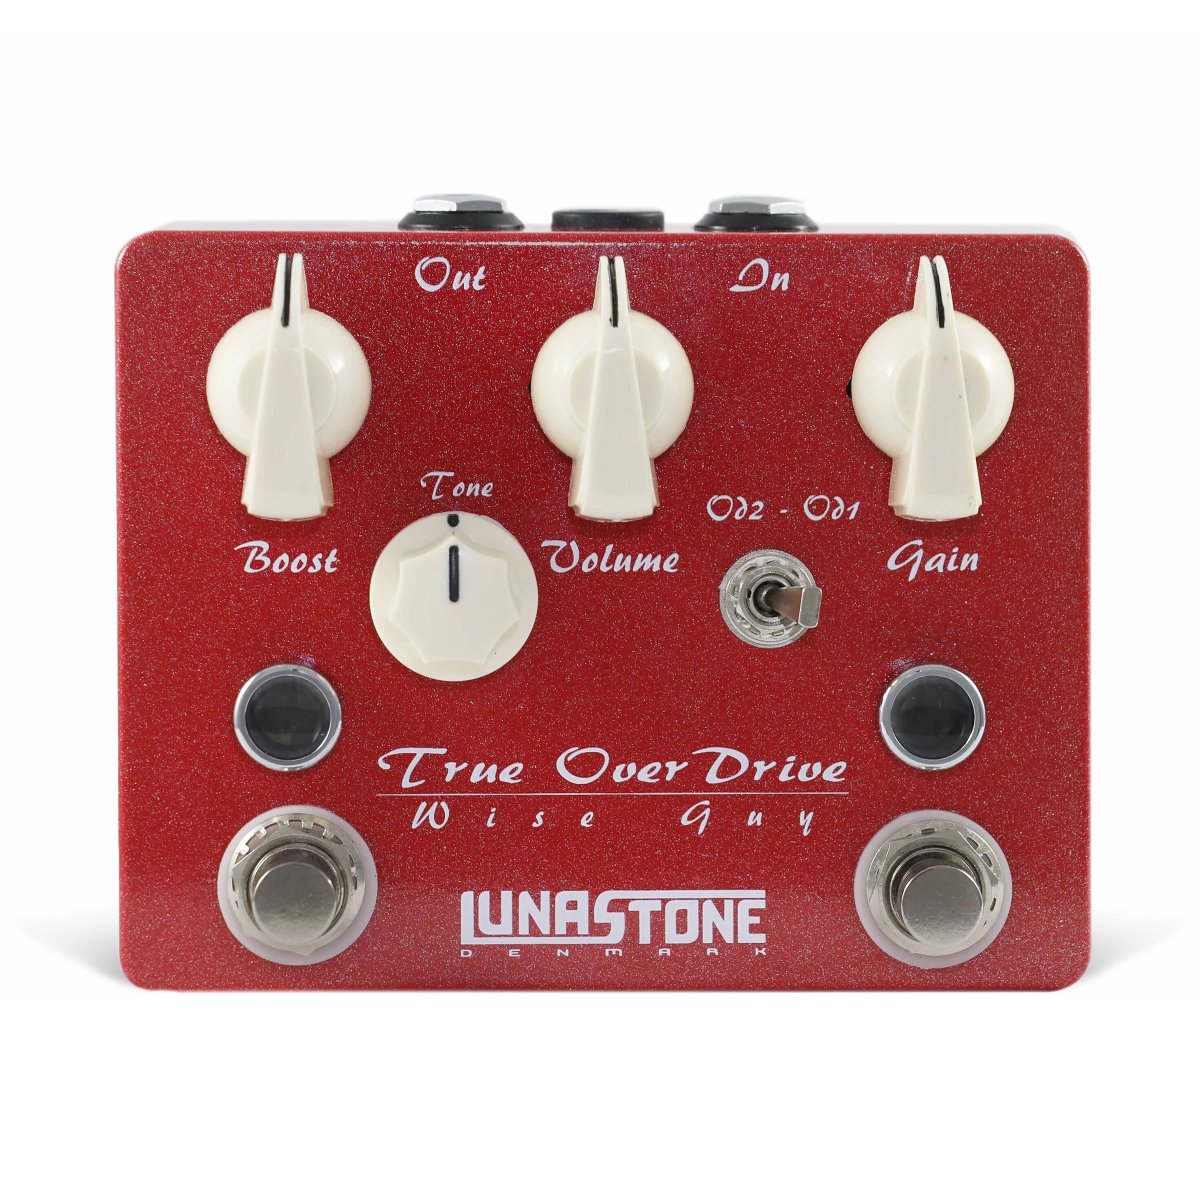 LunaStone Wise Guy is a classic #overdrive pedal that gives you a cutting, mid-focused crunch, coupled with the transparency and sweet responsiveness you would expect from a great vintage amp. #overdrivepedal #distortion #highgain #guitareffect

bluescitymusic.com/collections/lu…